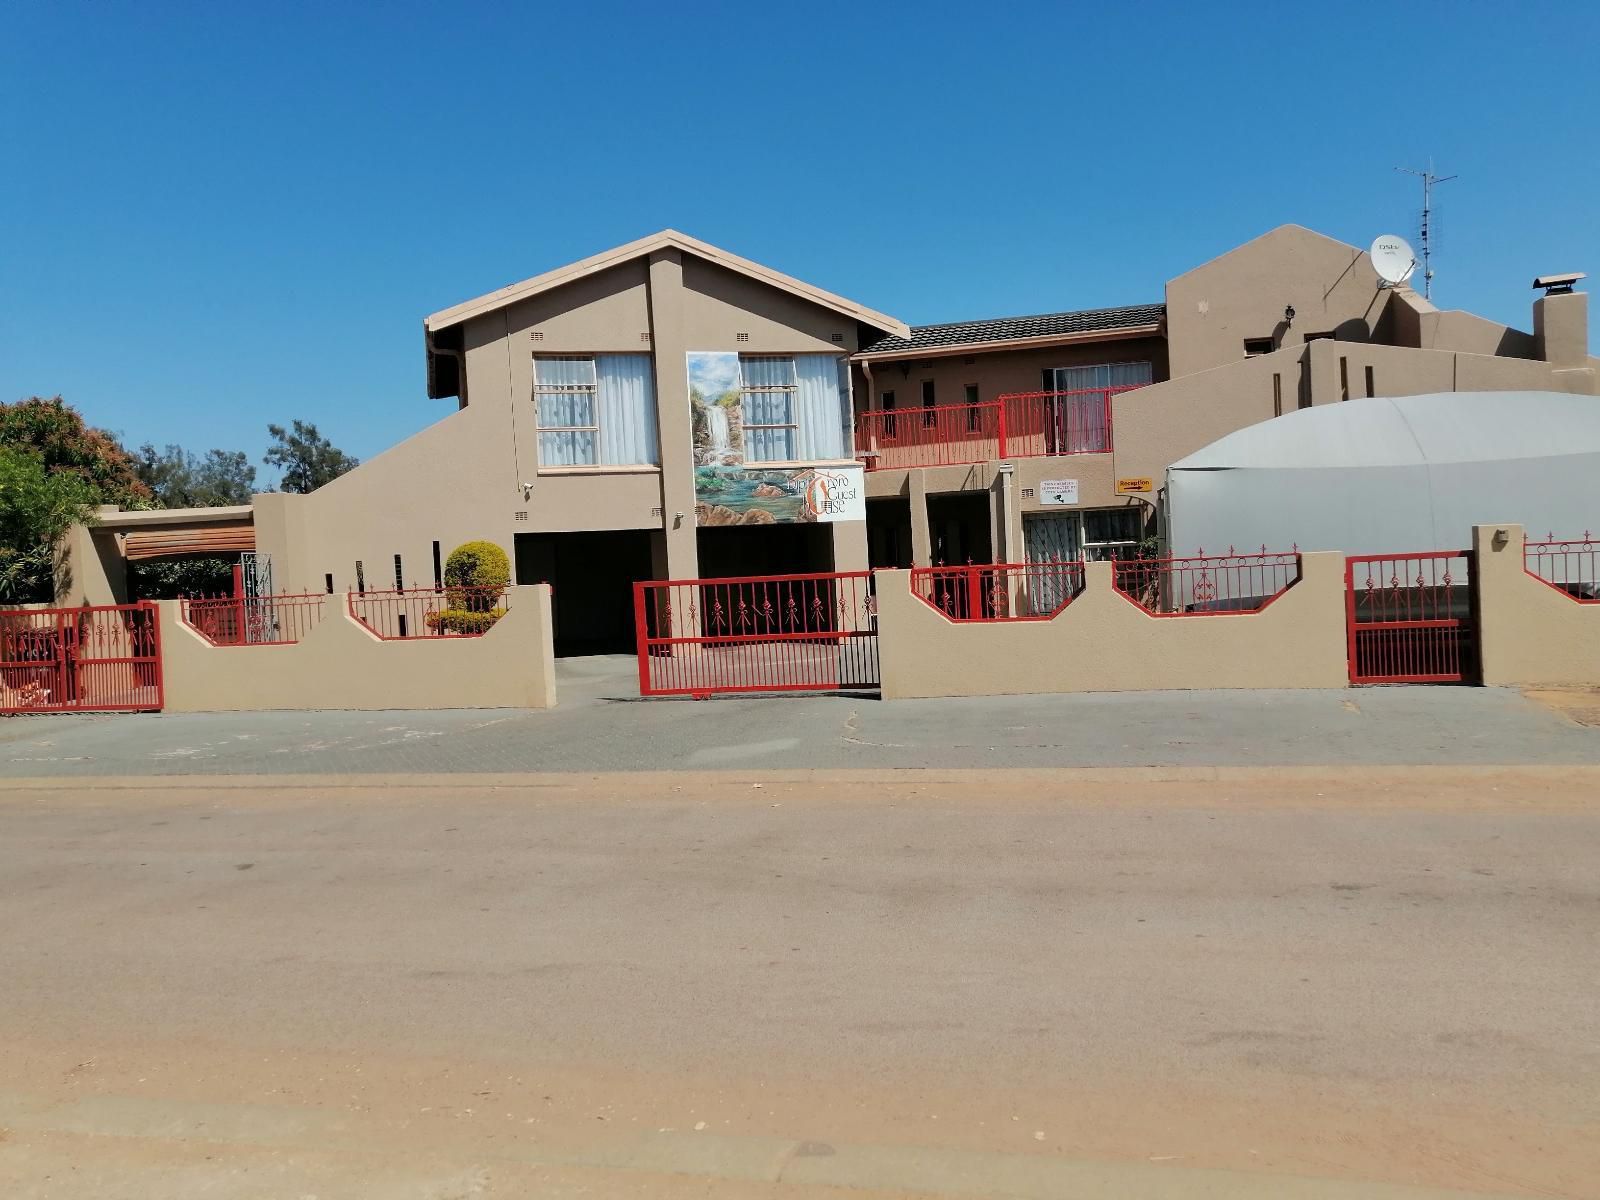 Diphororo Guesthouse Mogwase North West Province South Africa Complementary Colors, House, Building, Architecture